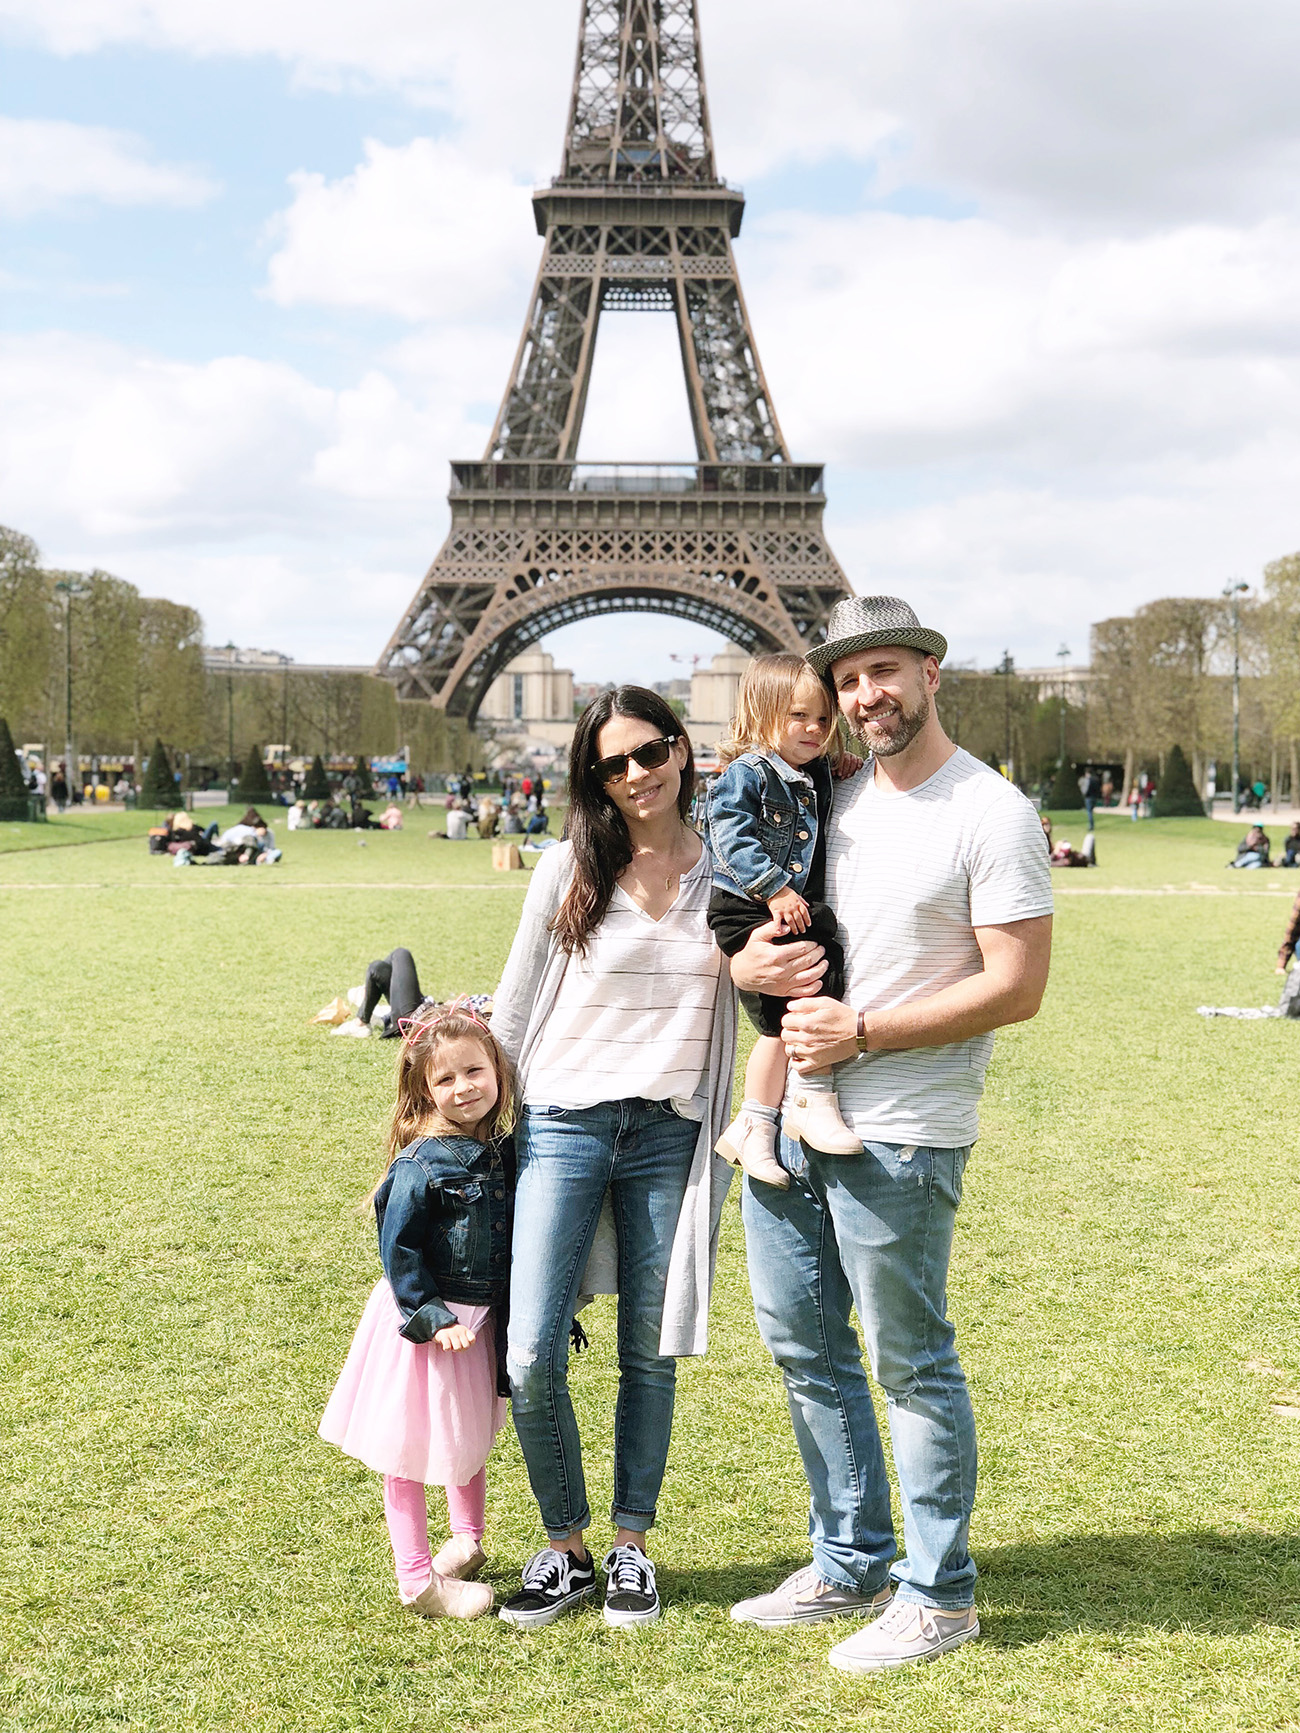 Eiffel Tower with the Family